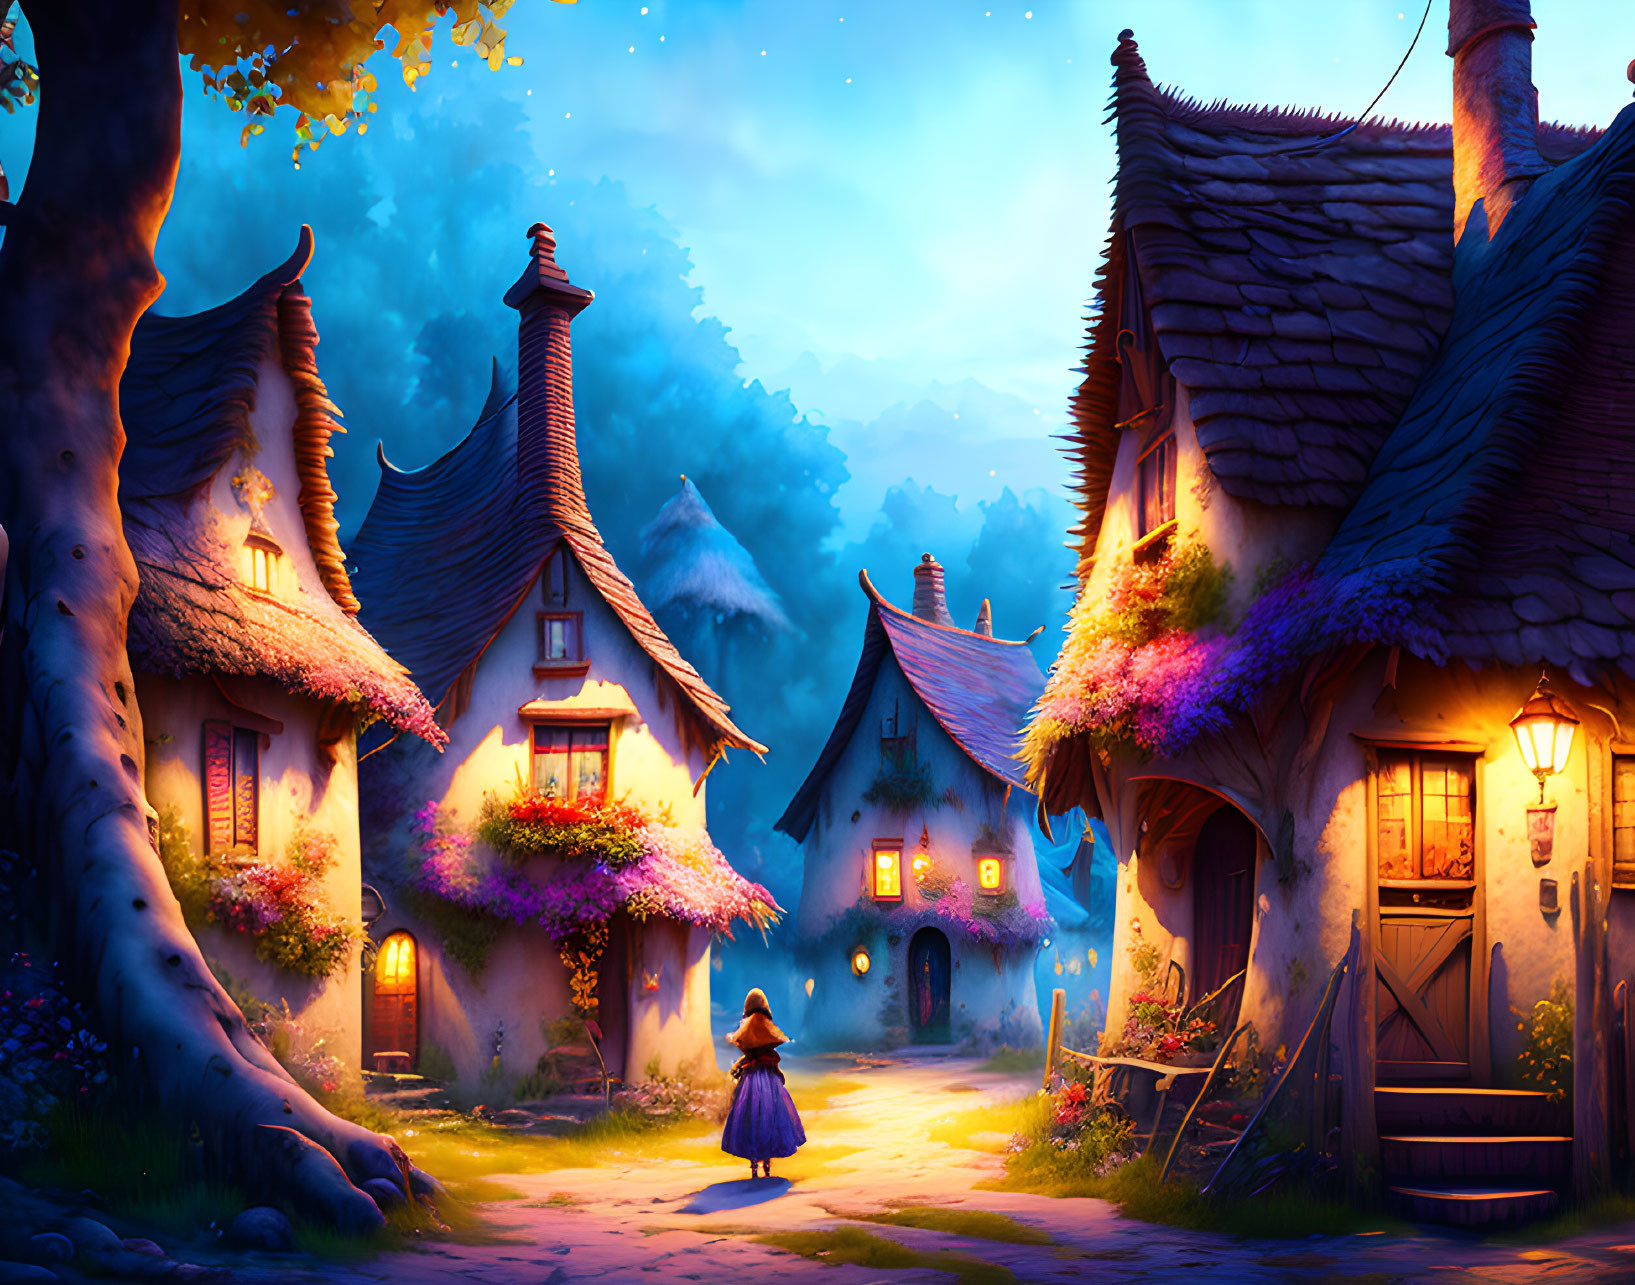 Twilight scene of whimsical village with thatched-roof cottages and blooming flowers